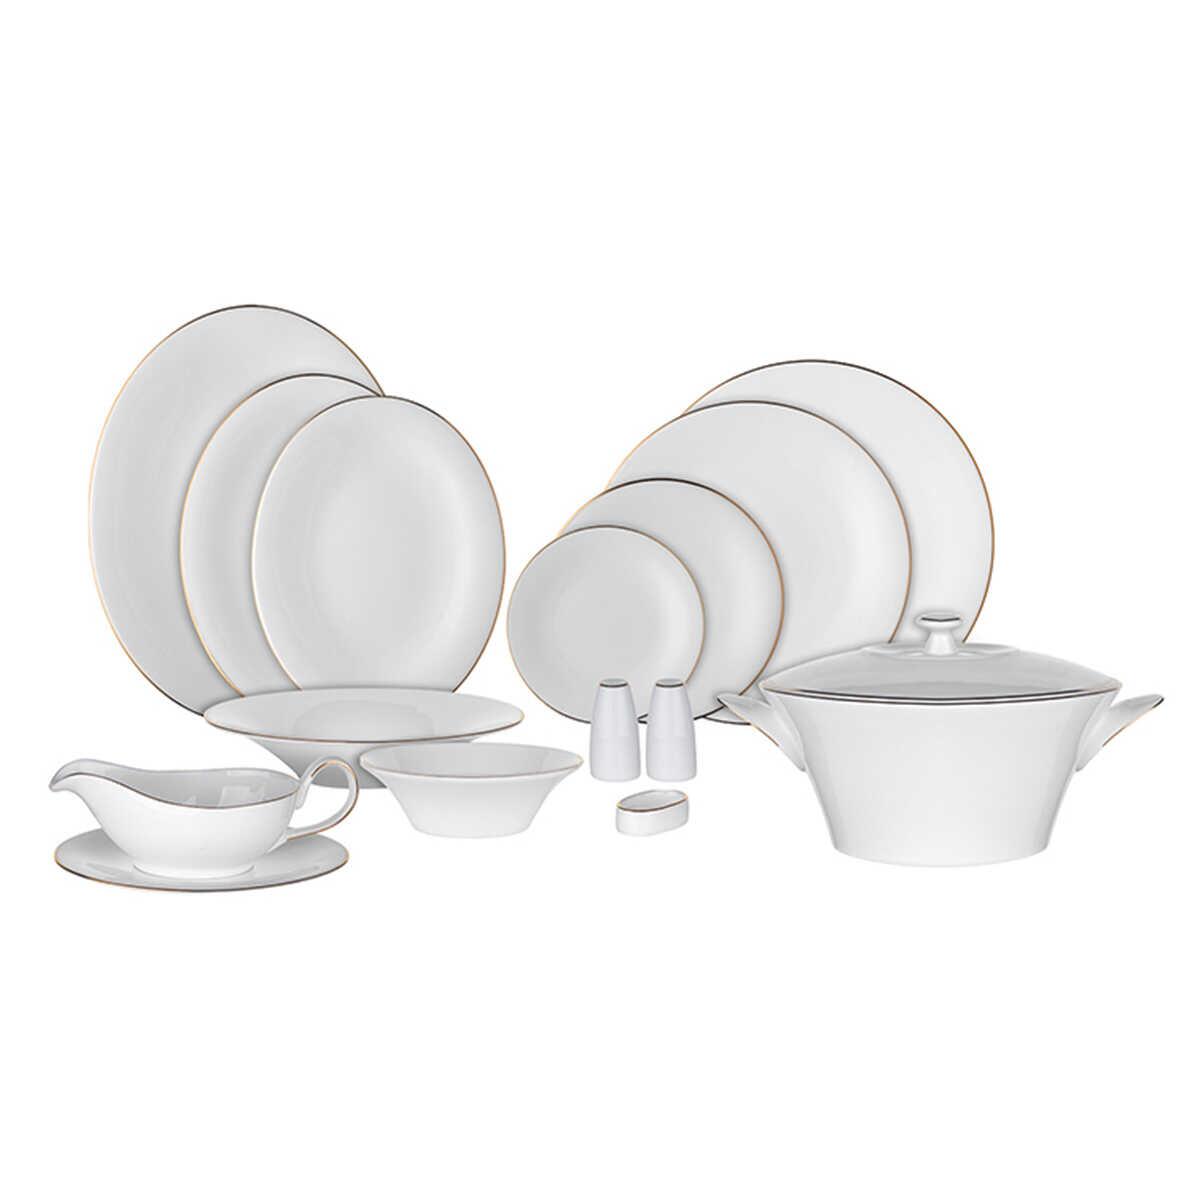 Evaliza Grace Gold 101 Piece Dinner Set for 12 Persons